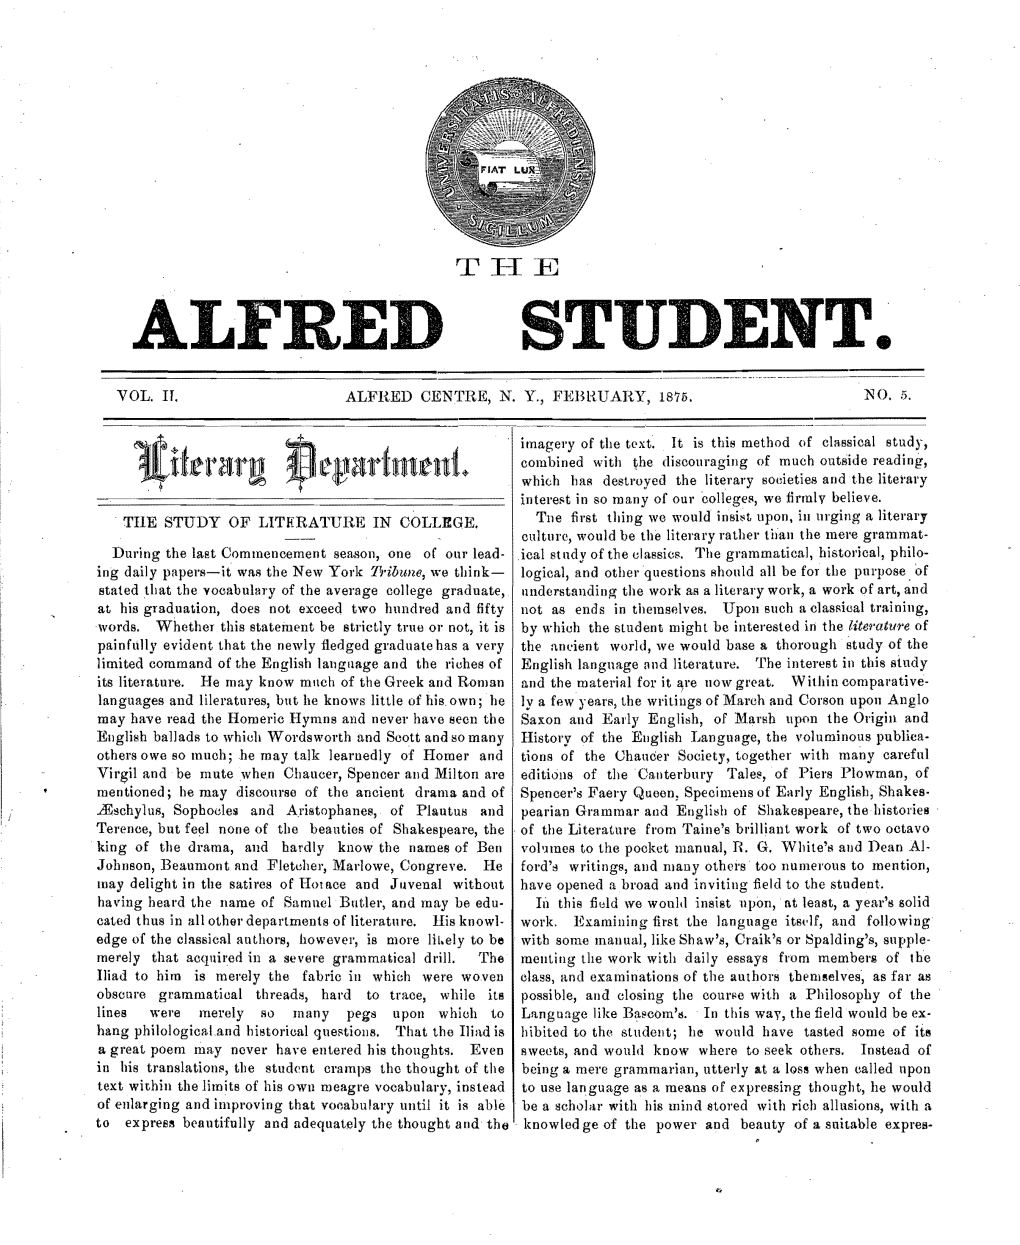 Alfred Student